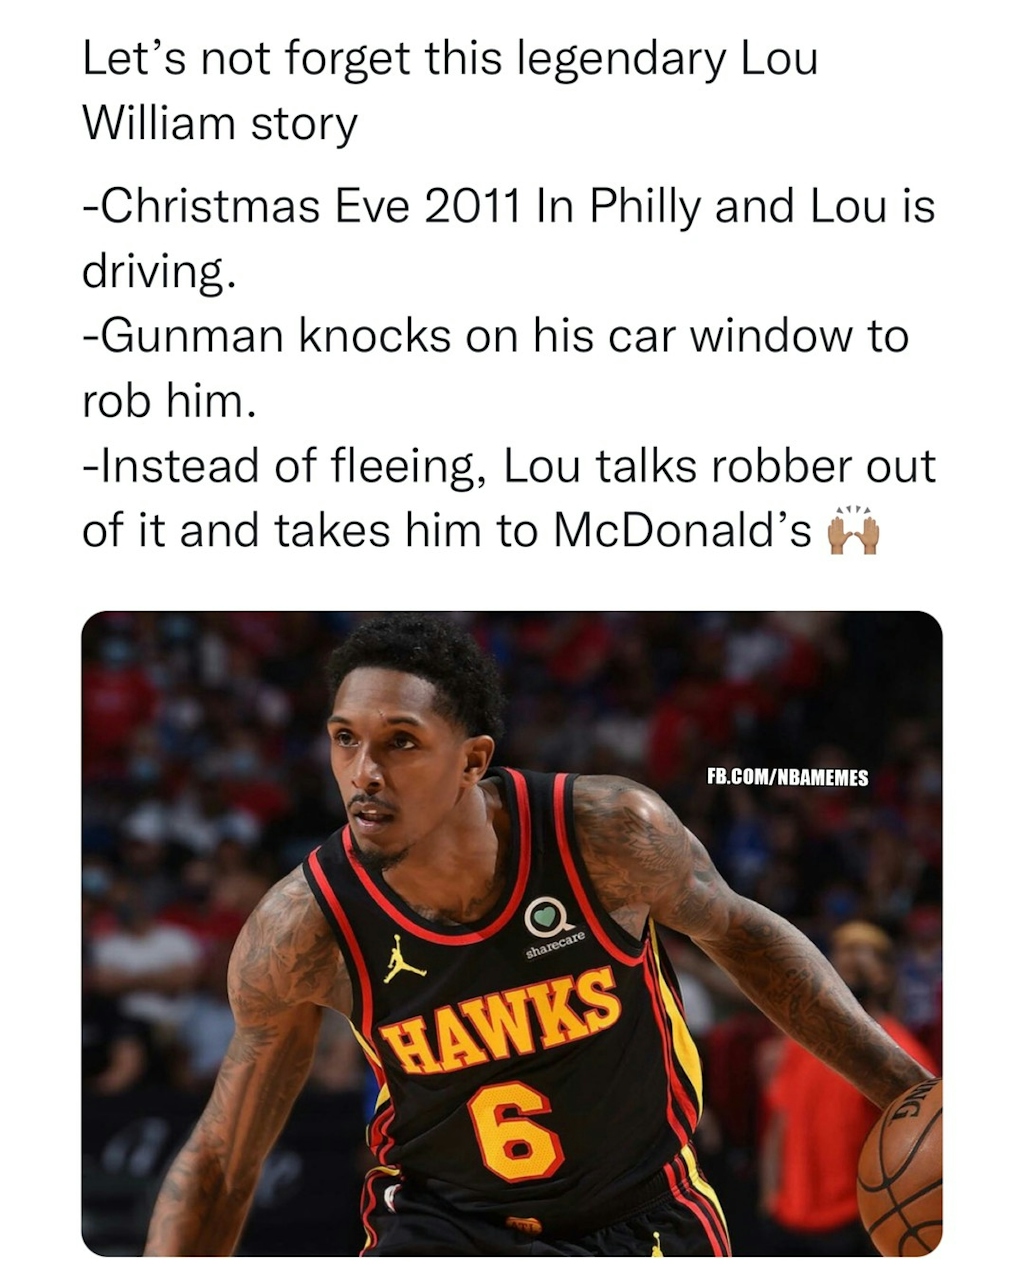 Takes a lot of courage to do this. Respect to Lou 🙏🏽

#nba #louwilliams #hawks